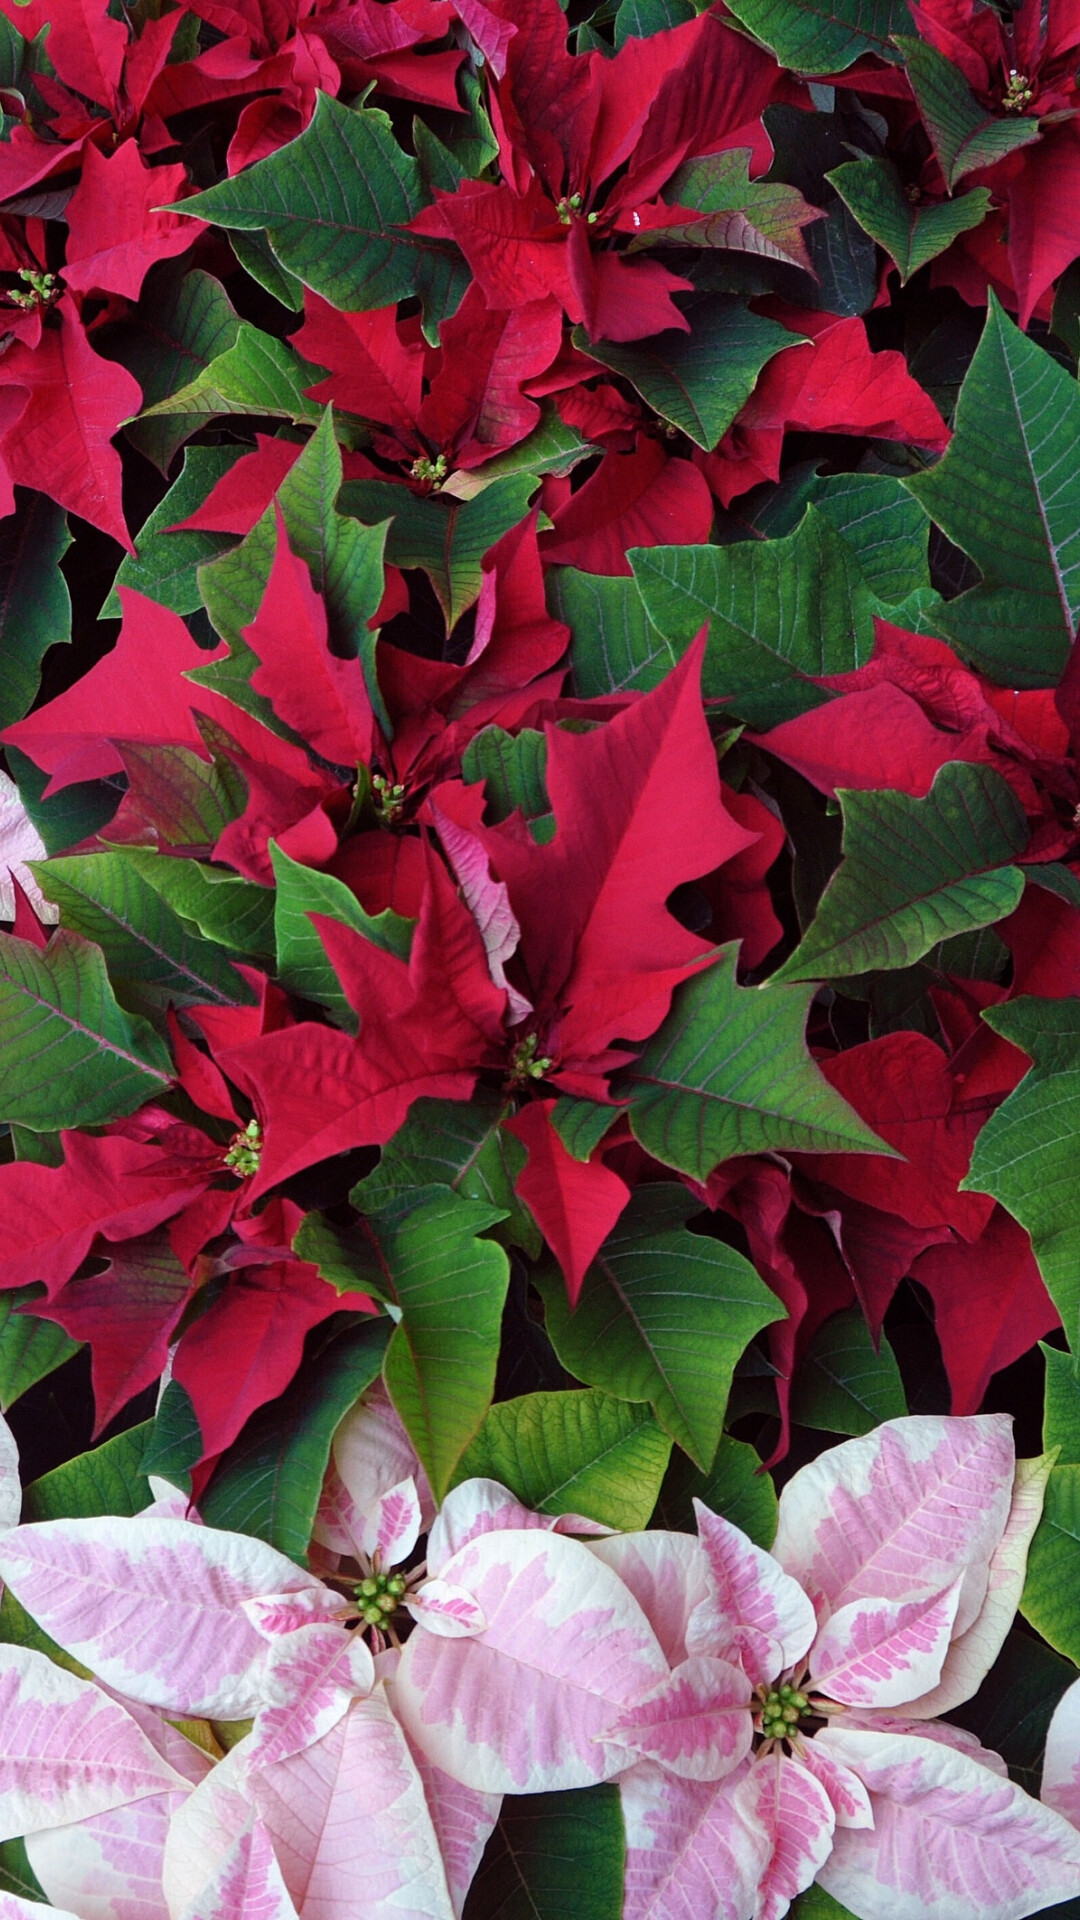 Poinsettia: The flower buds are the red or green buttons in the center of the bracts that open to a small yellow flower. 1080x1920 Full HD Background.